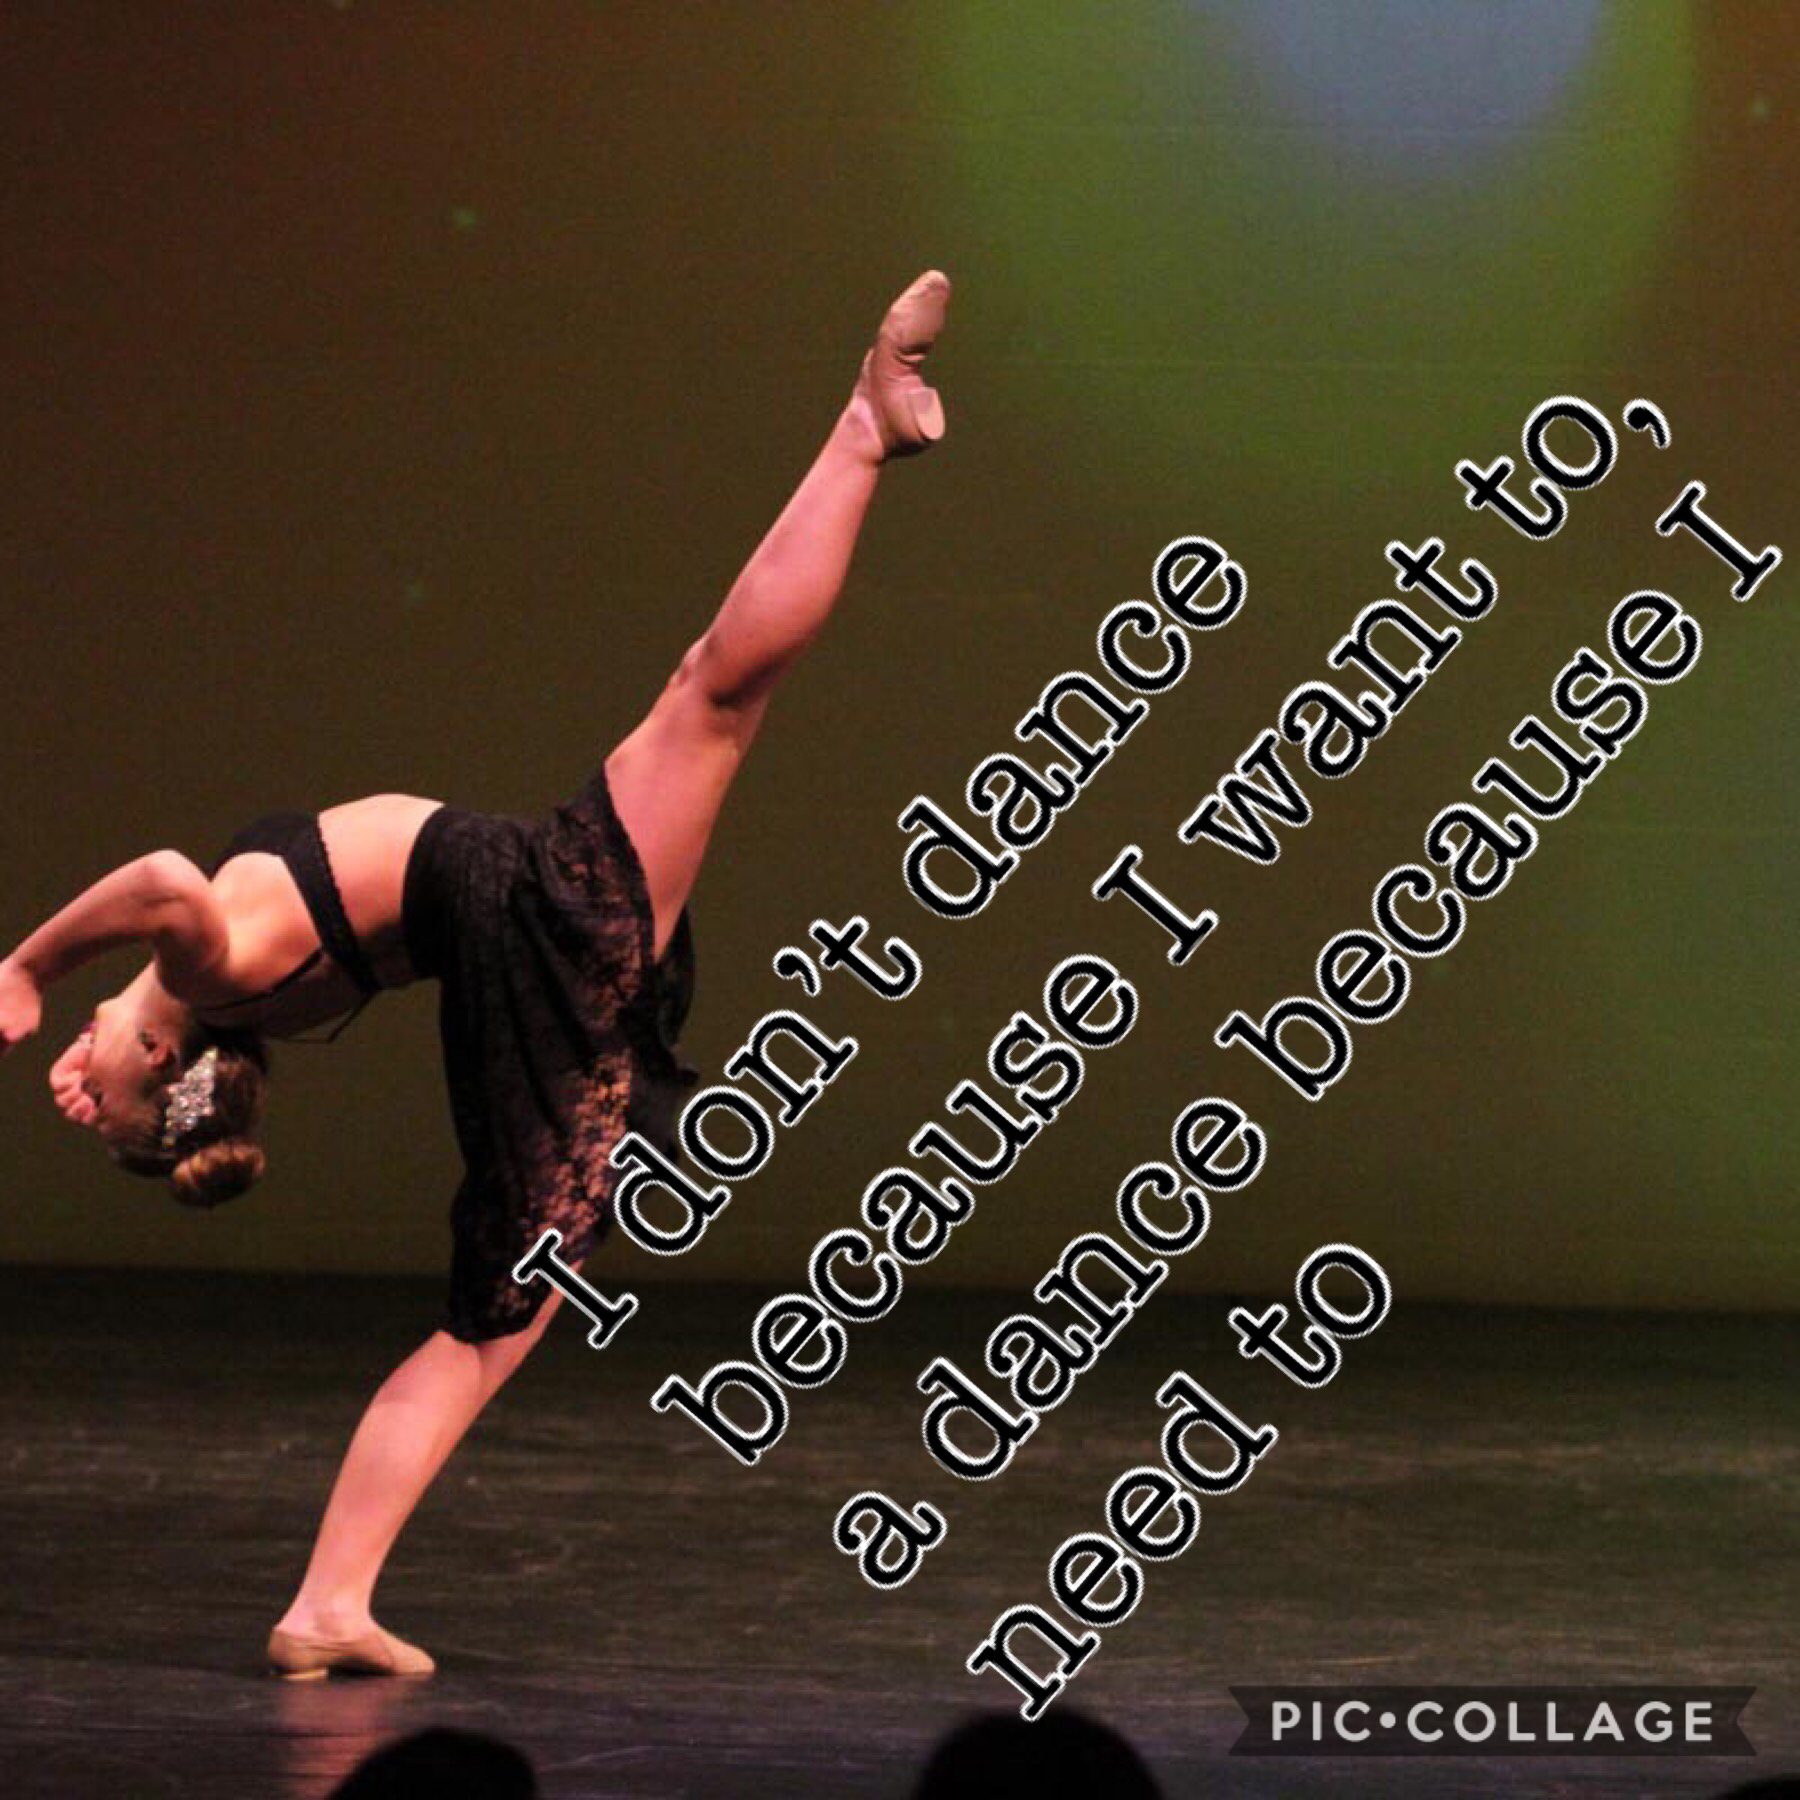 Me a recent comps!!! This quote is so true! I Love dance so much❣️